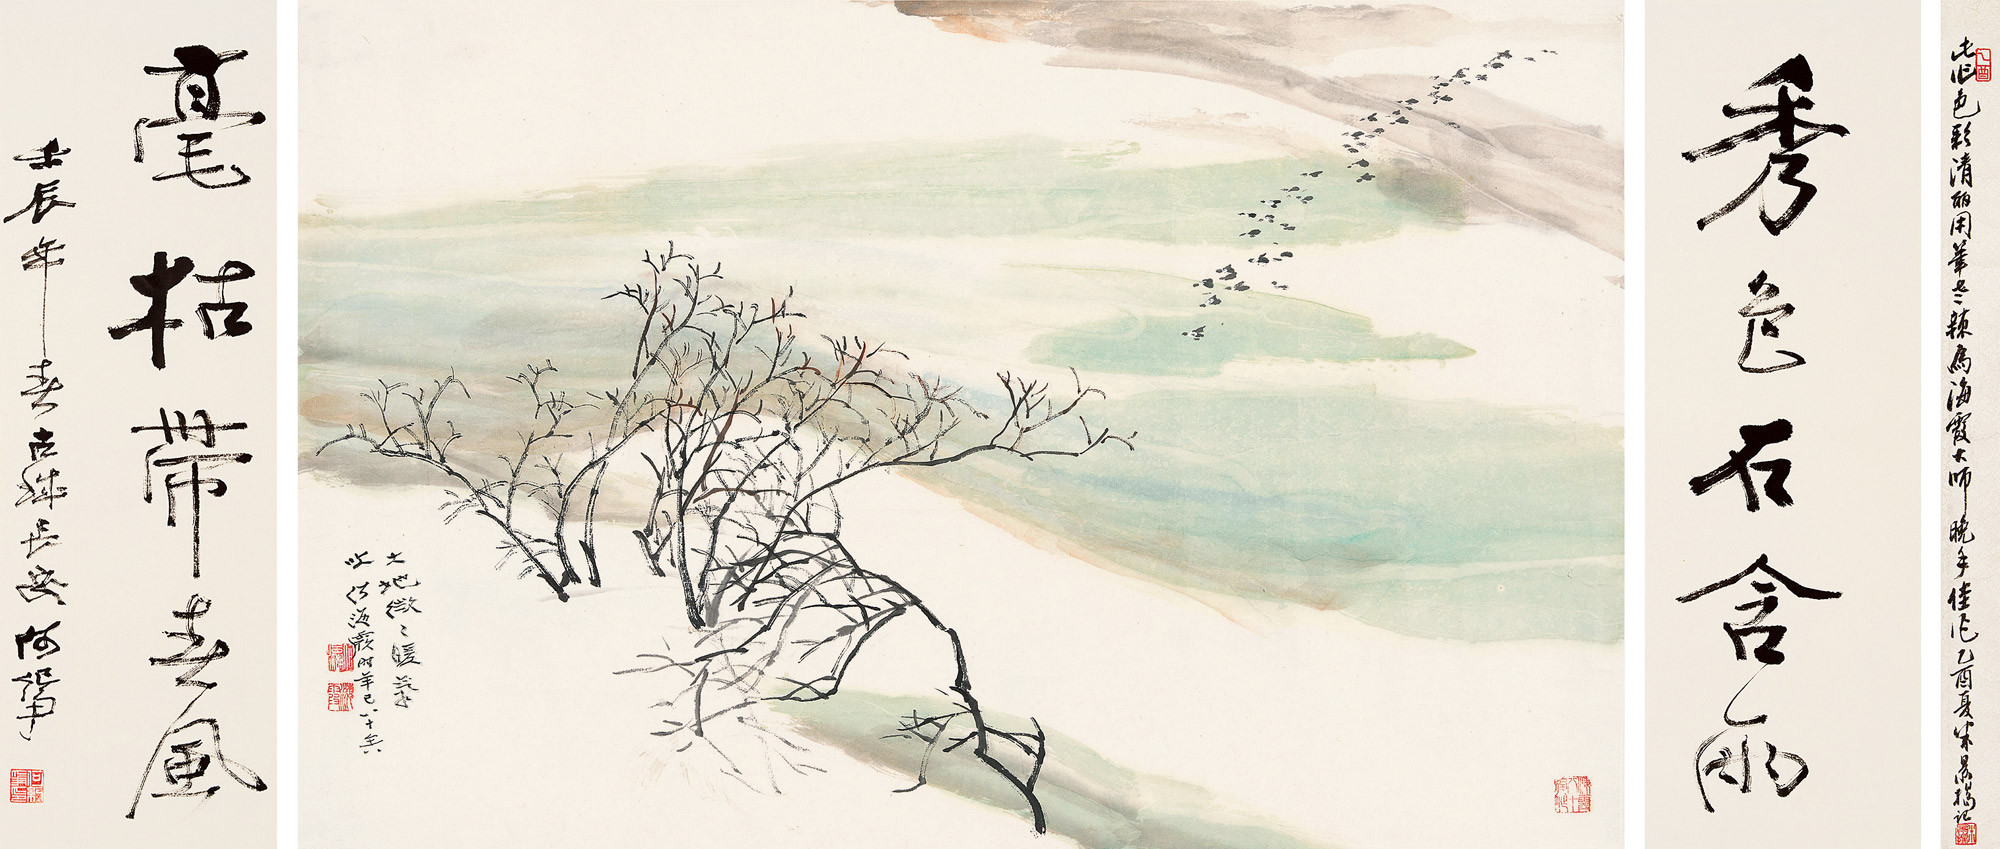 SPRING LANDSCAPE WITH COUPLET